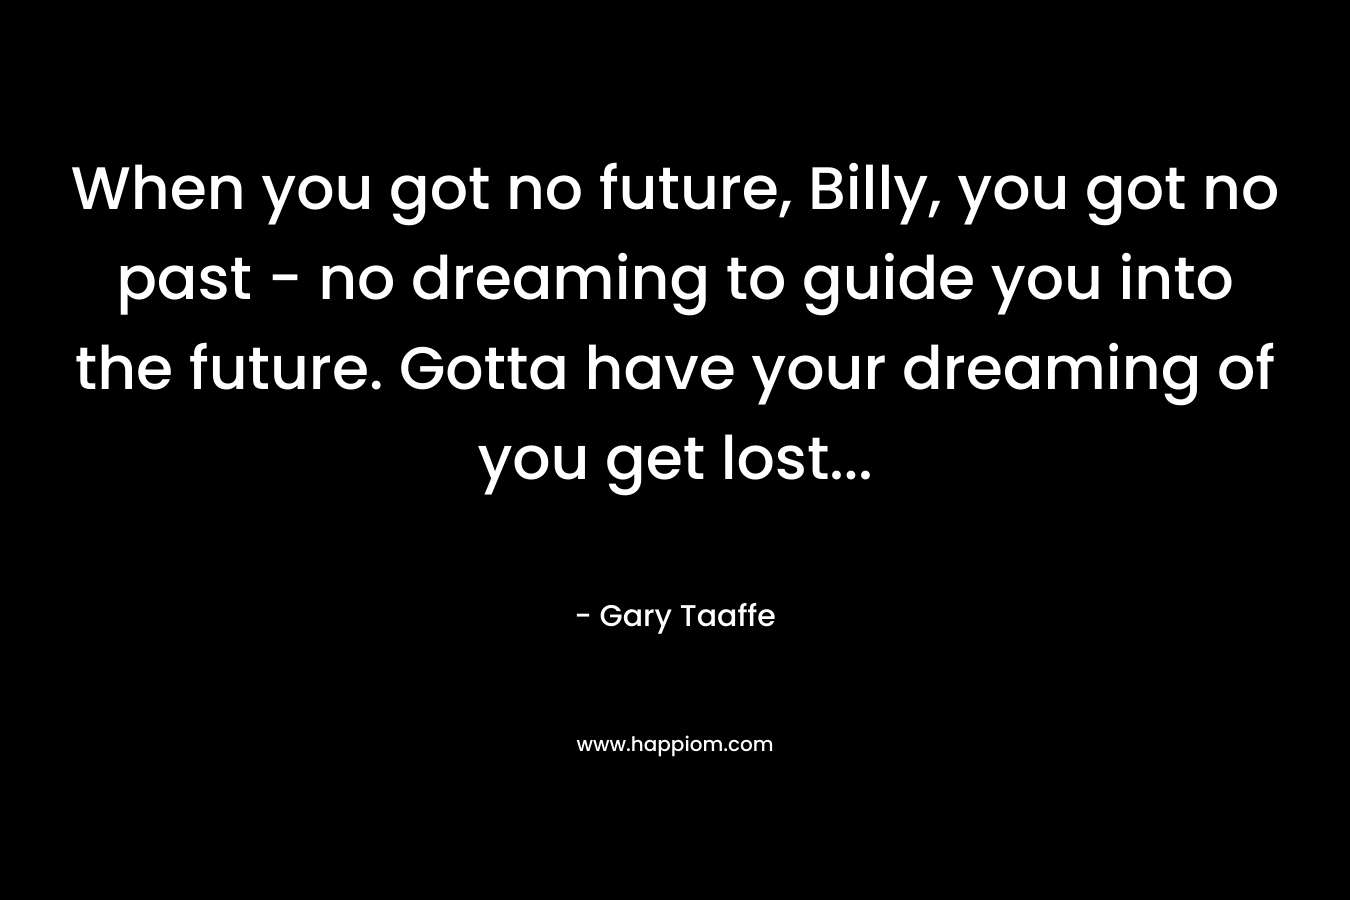 When you got no future, Billy, you got no past - no dreaming to guide you into the future. Gotta have your dreaming of you get lost...